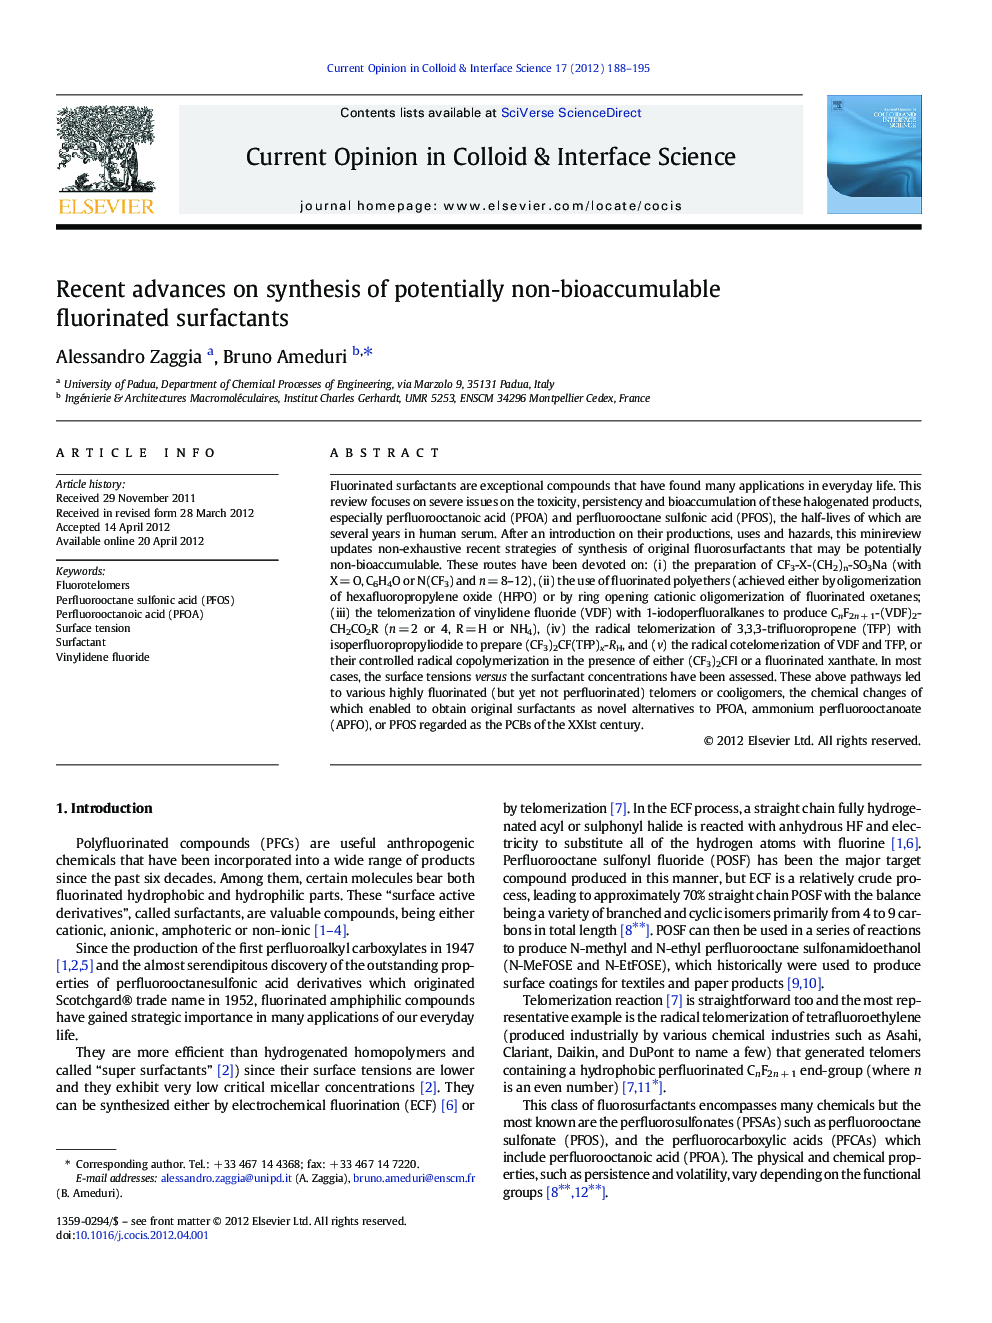 Recent advances on synthesis of potentially non-bioaccumulable fluorinated surfactants